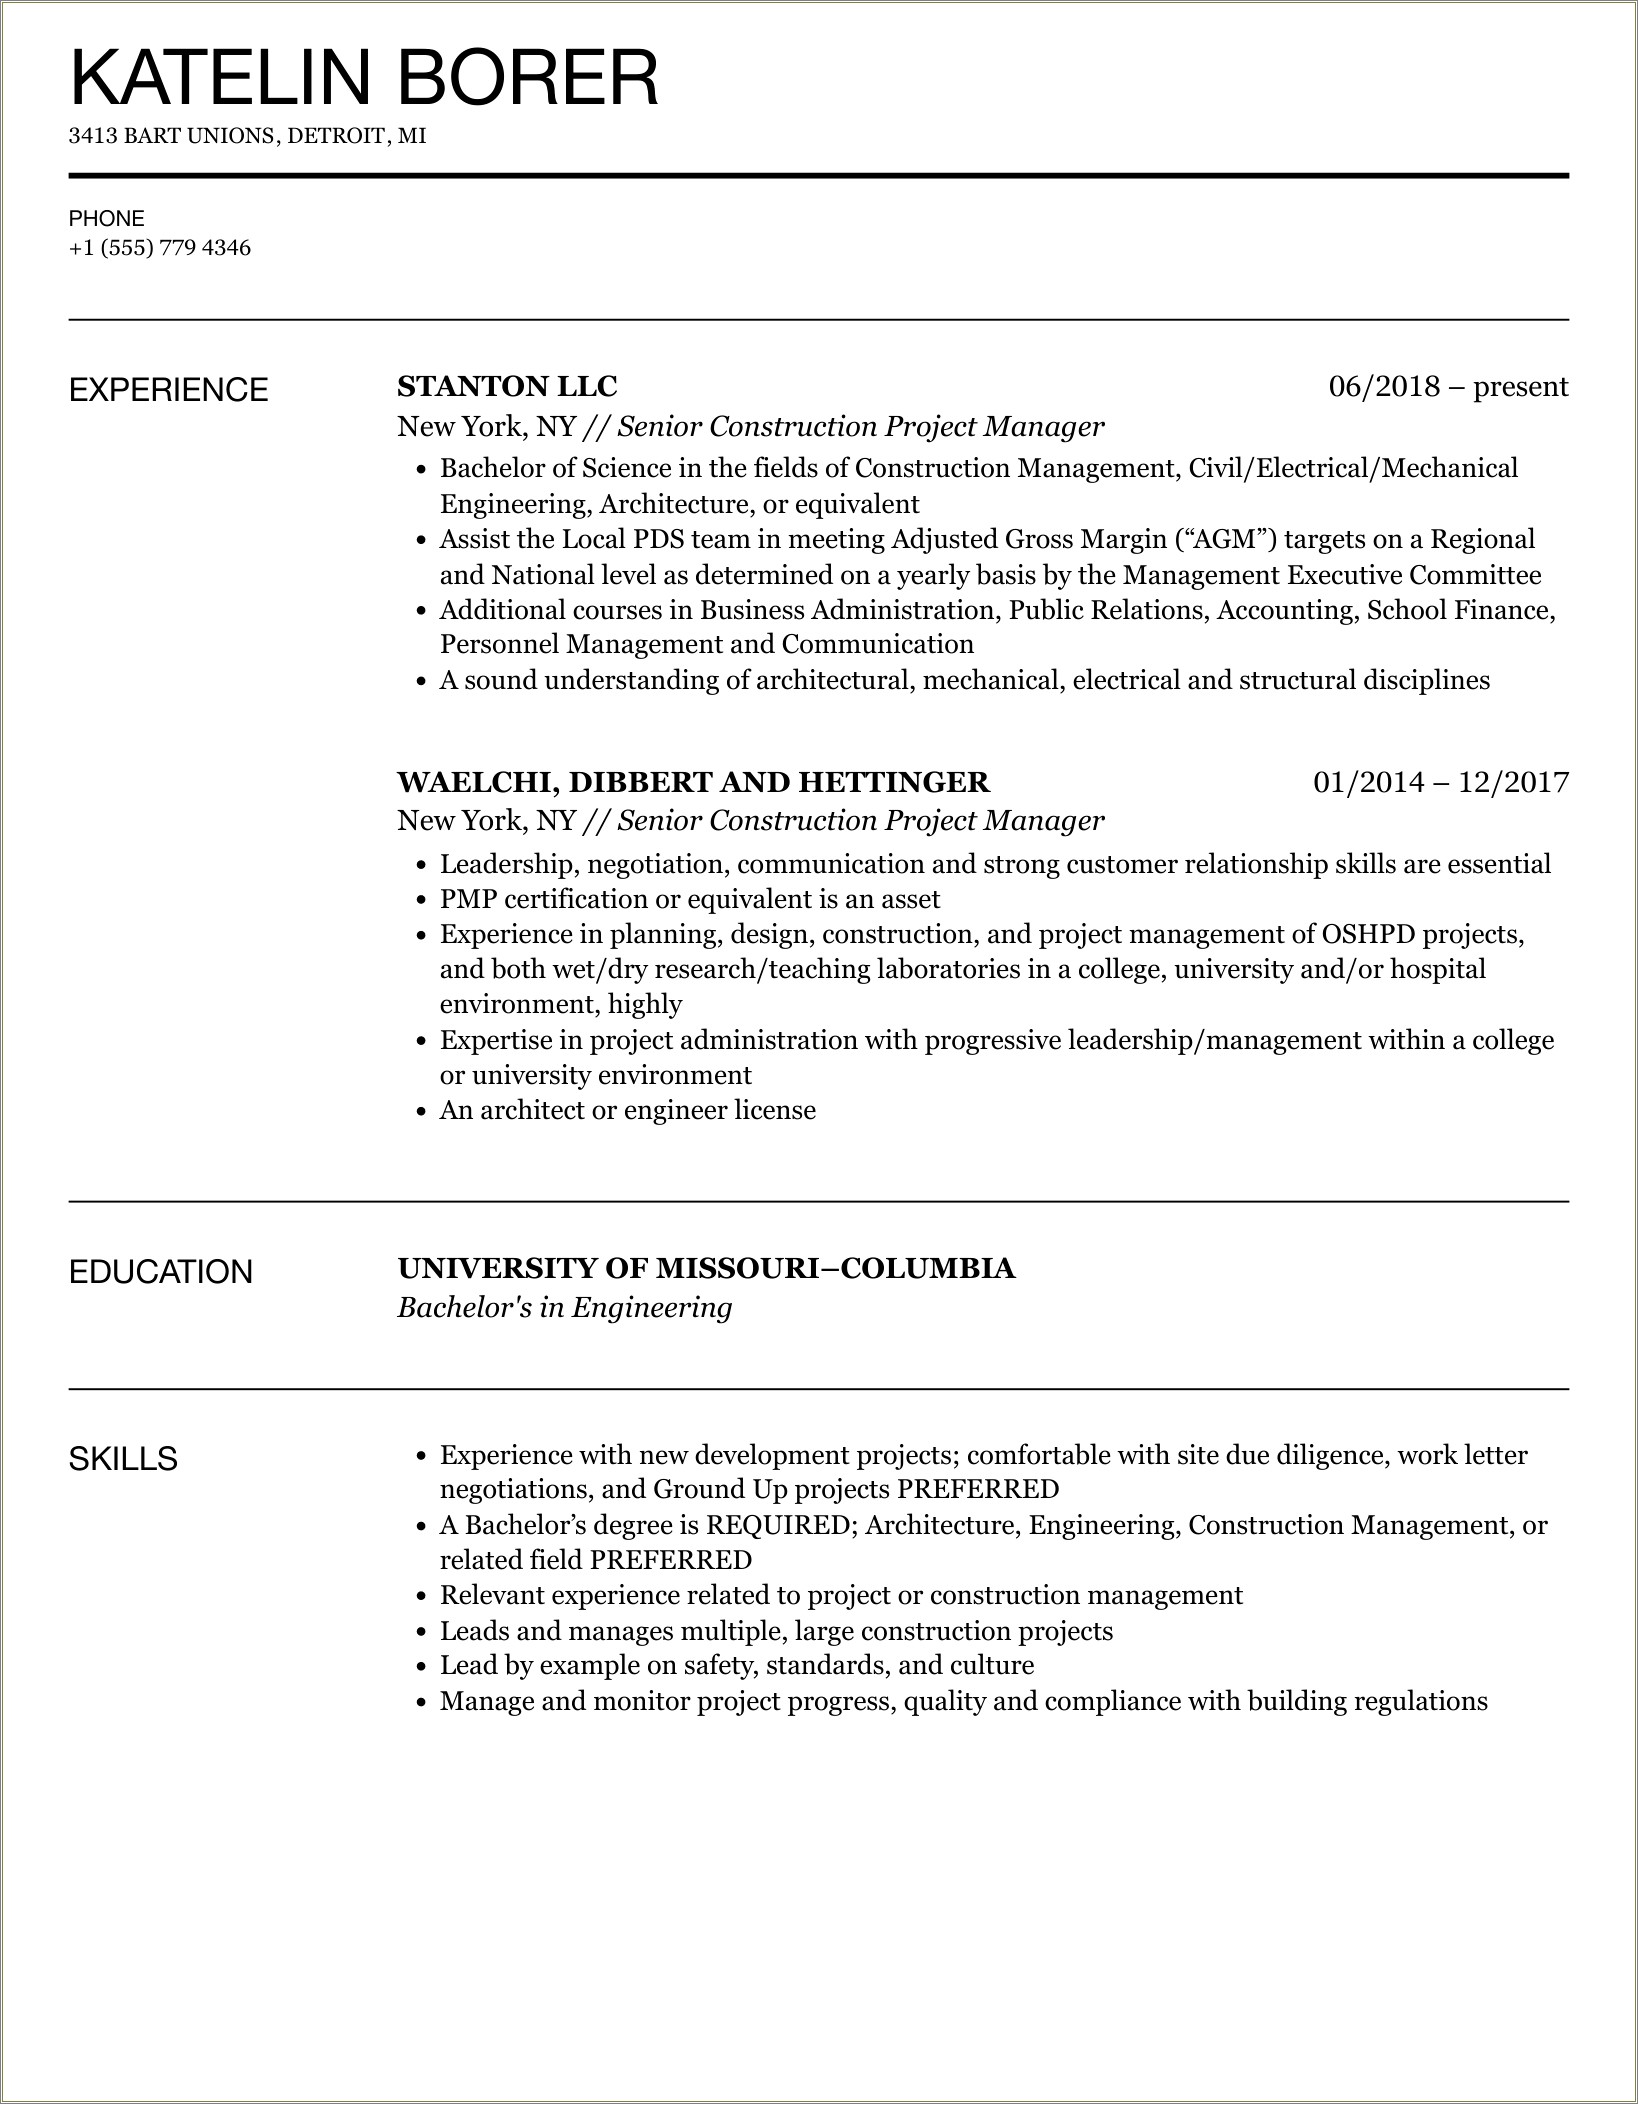 Free Construction Project Manager Resume Templates